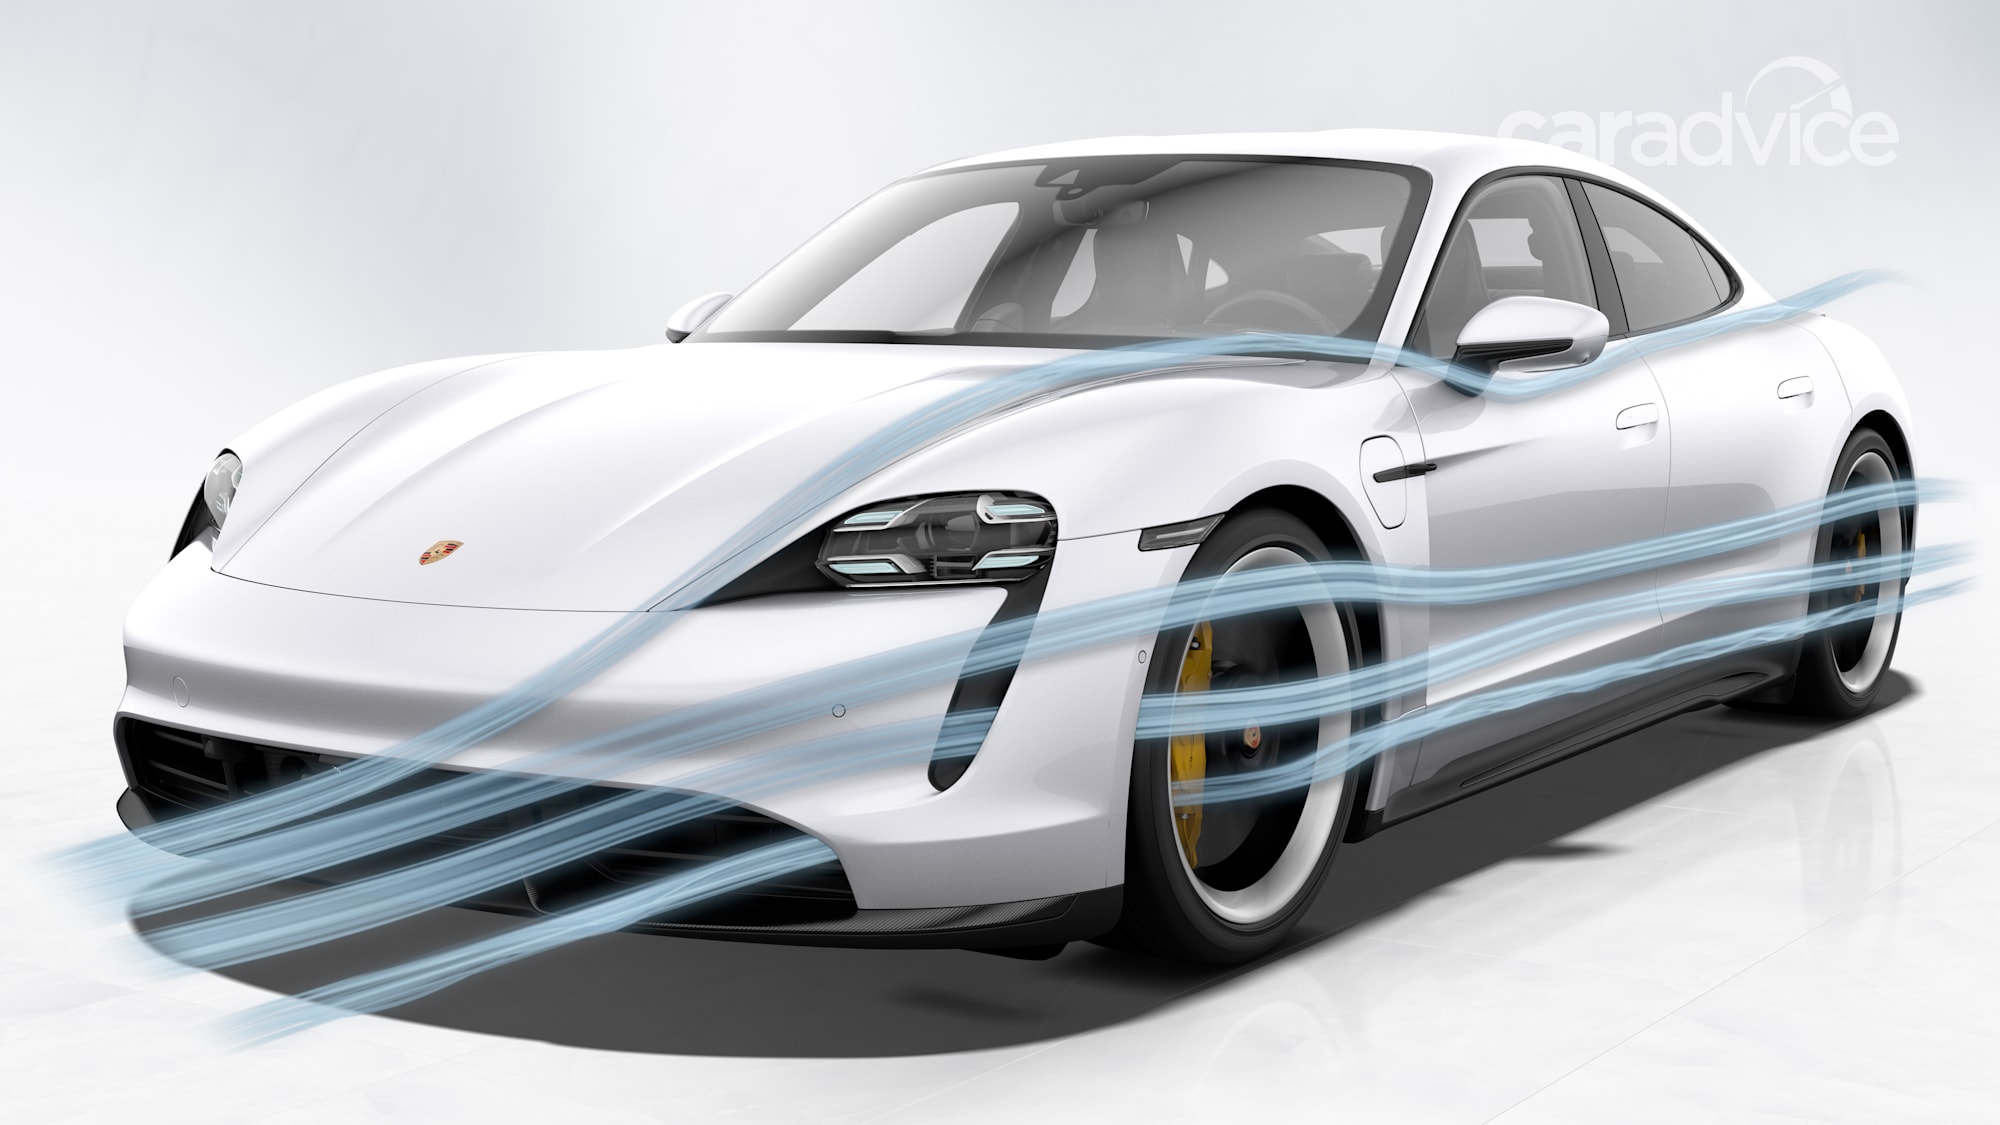 Porsche Taycan 270kw Charging First Production Car To Use 800v Architecture And Intelligent